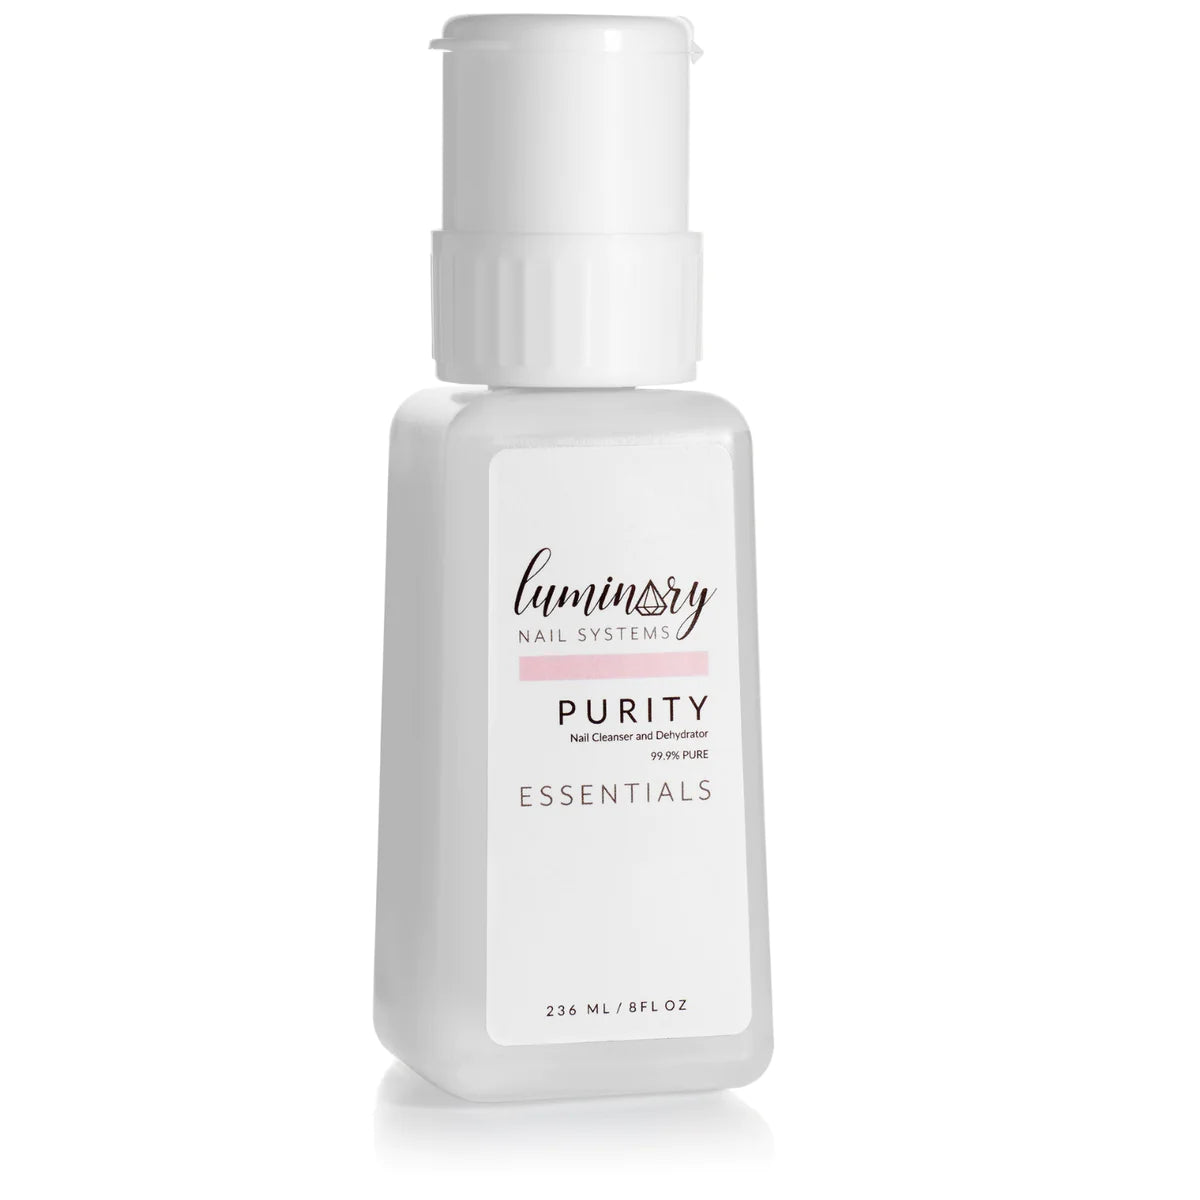 "Purity" Nail Cleanser And Dehydrator 8oz